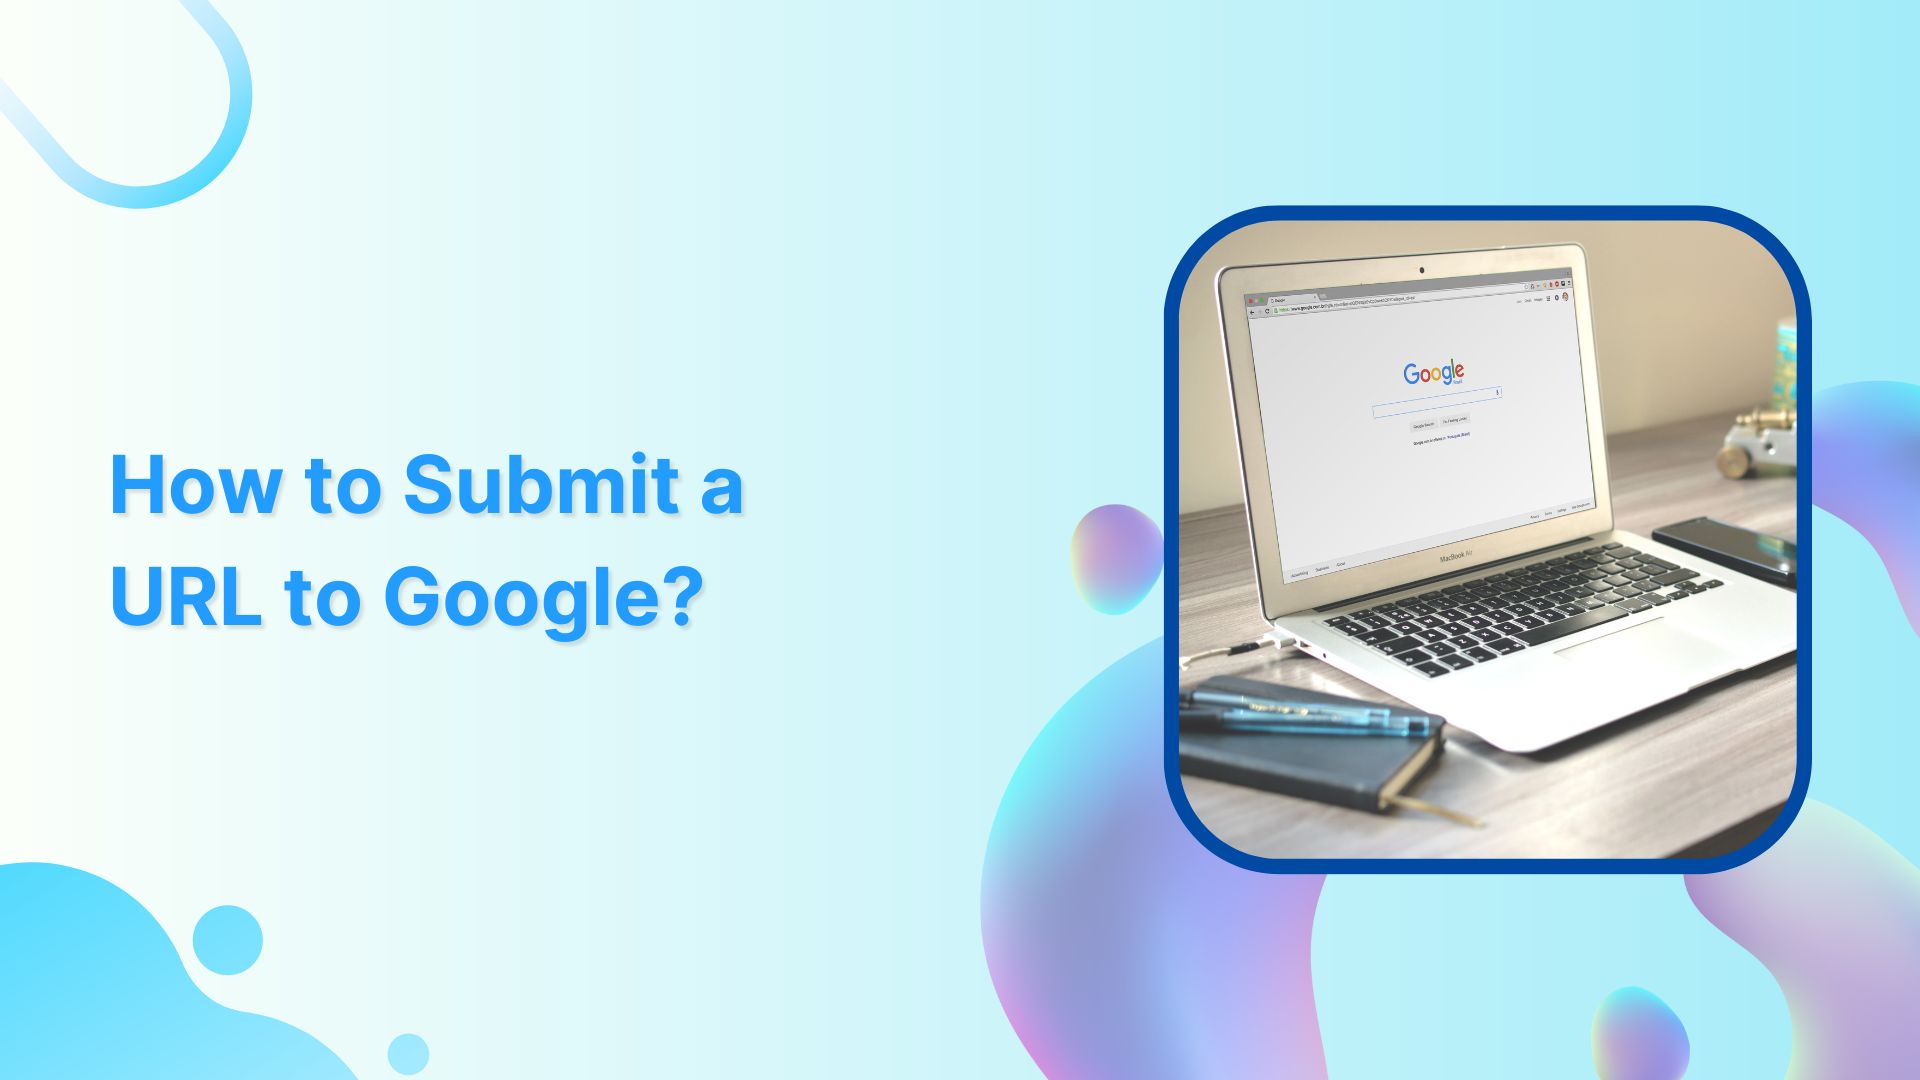 How to Submit a URL to Google: A Quick and Easy Guide